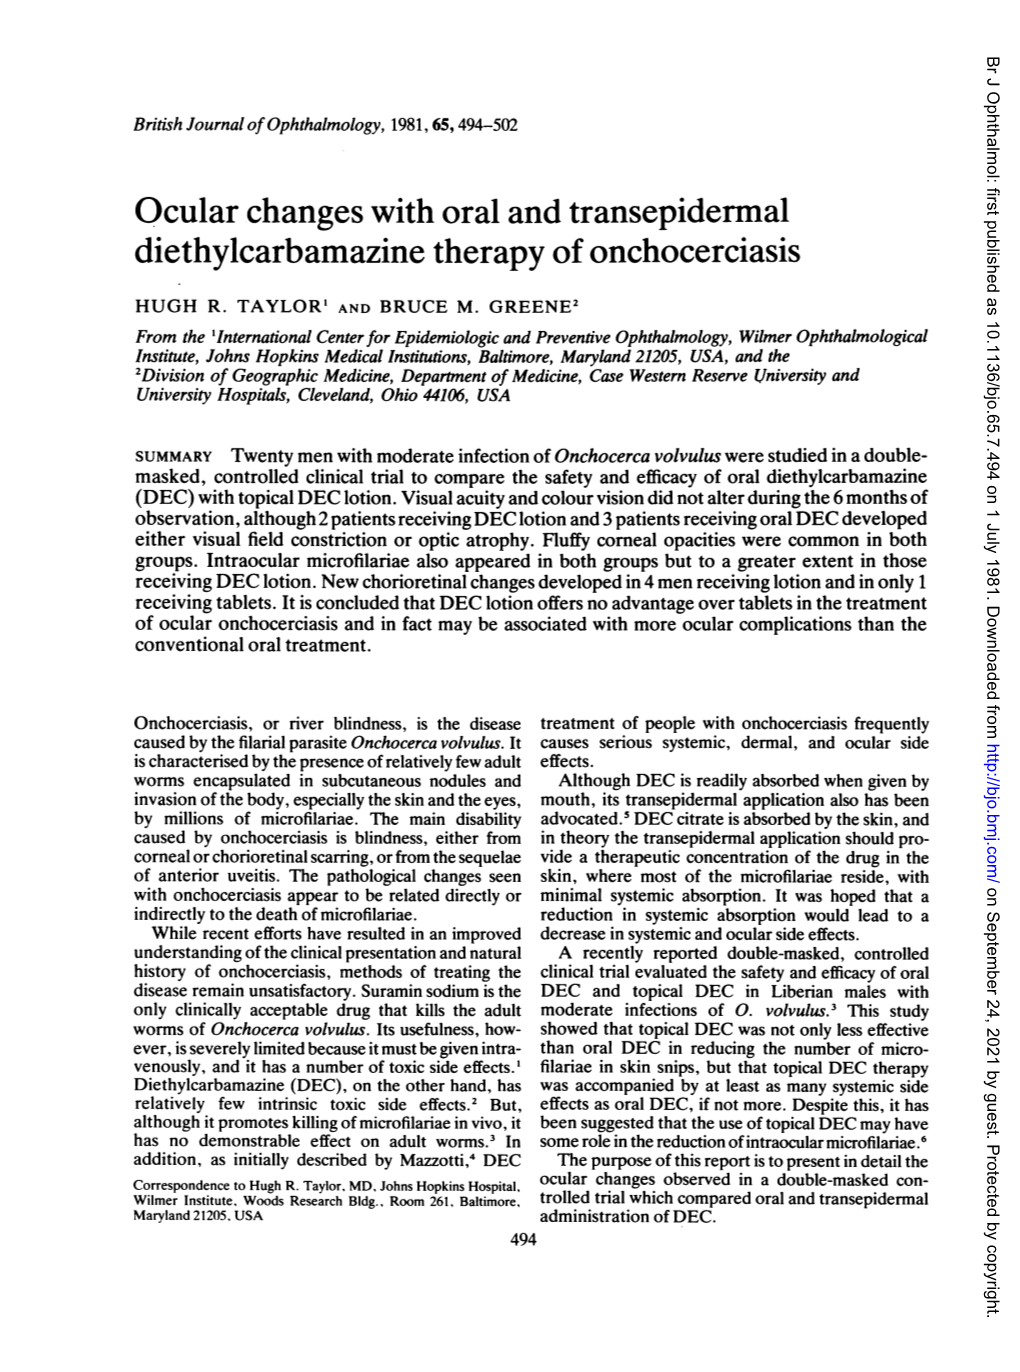 Ocular Changes with Oral and Transepidermal Diethylcarbamazine Therapy of Onchocerciasis